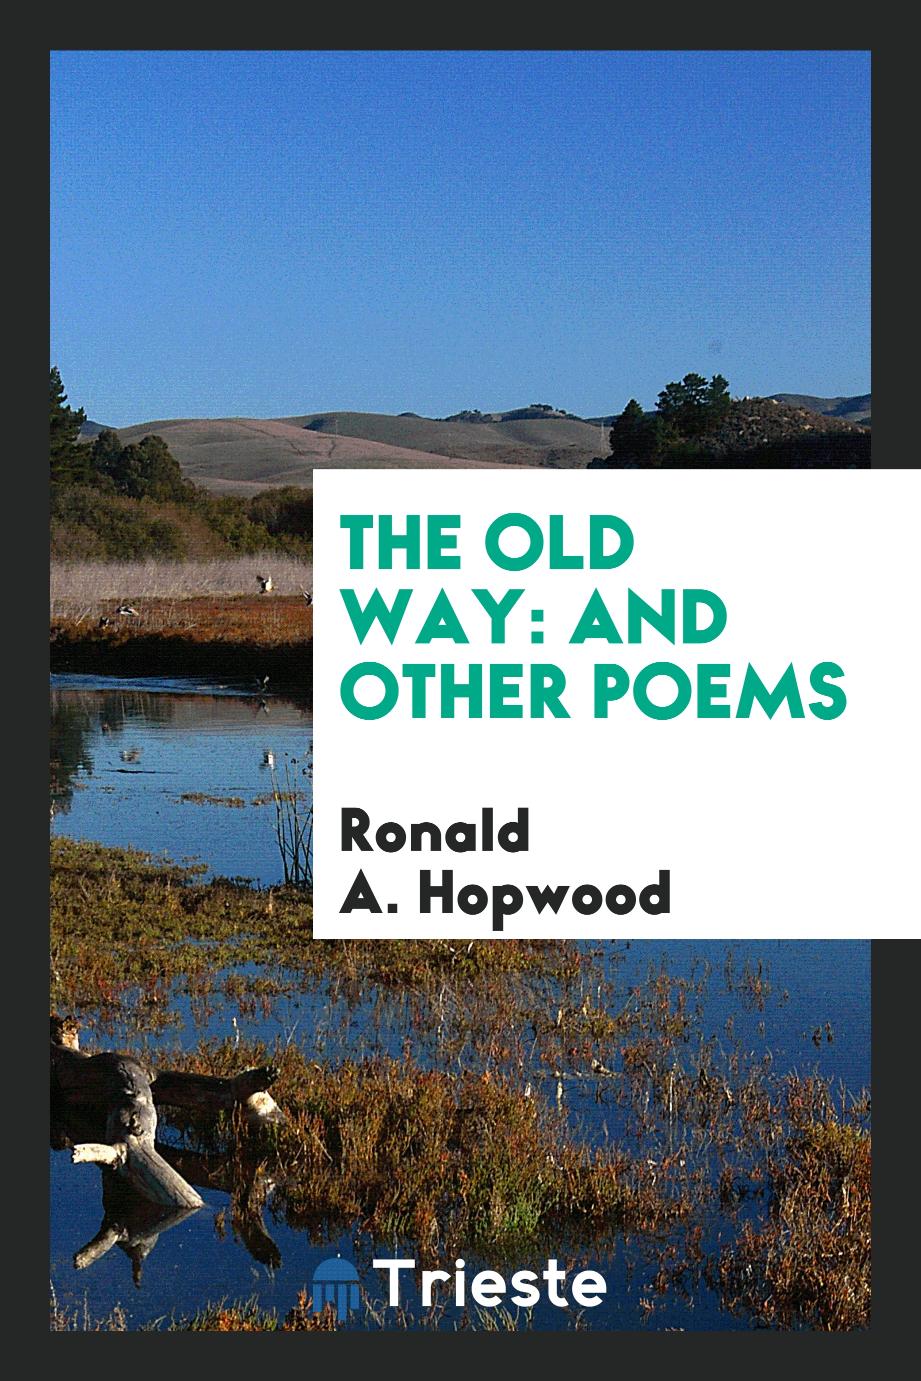 The old way: and other poems